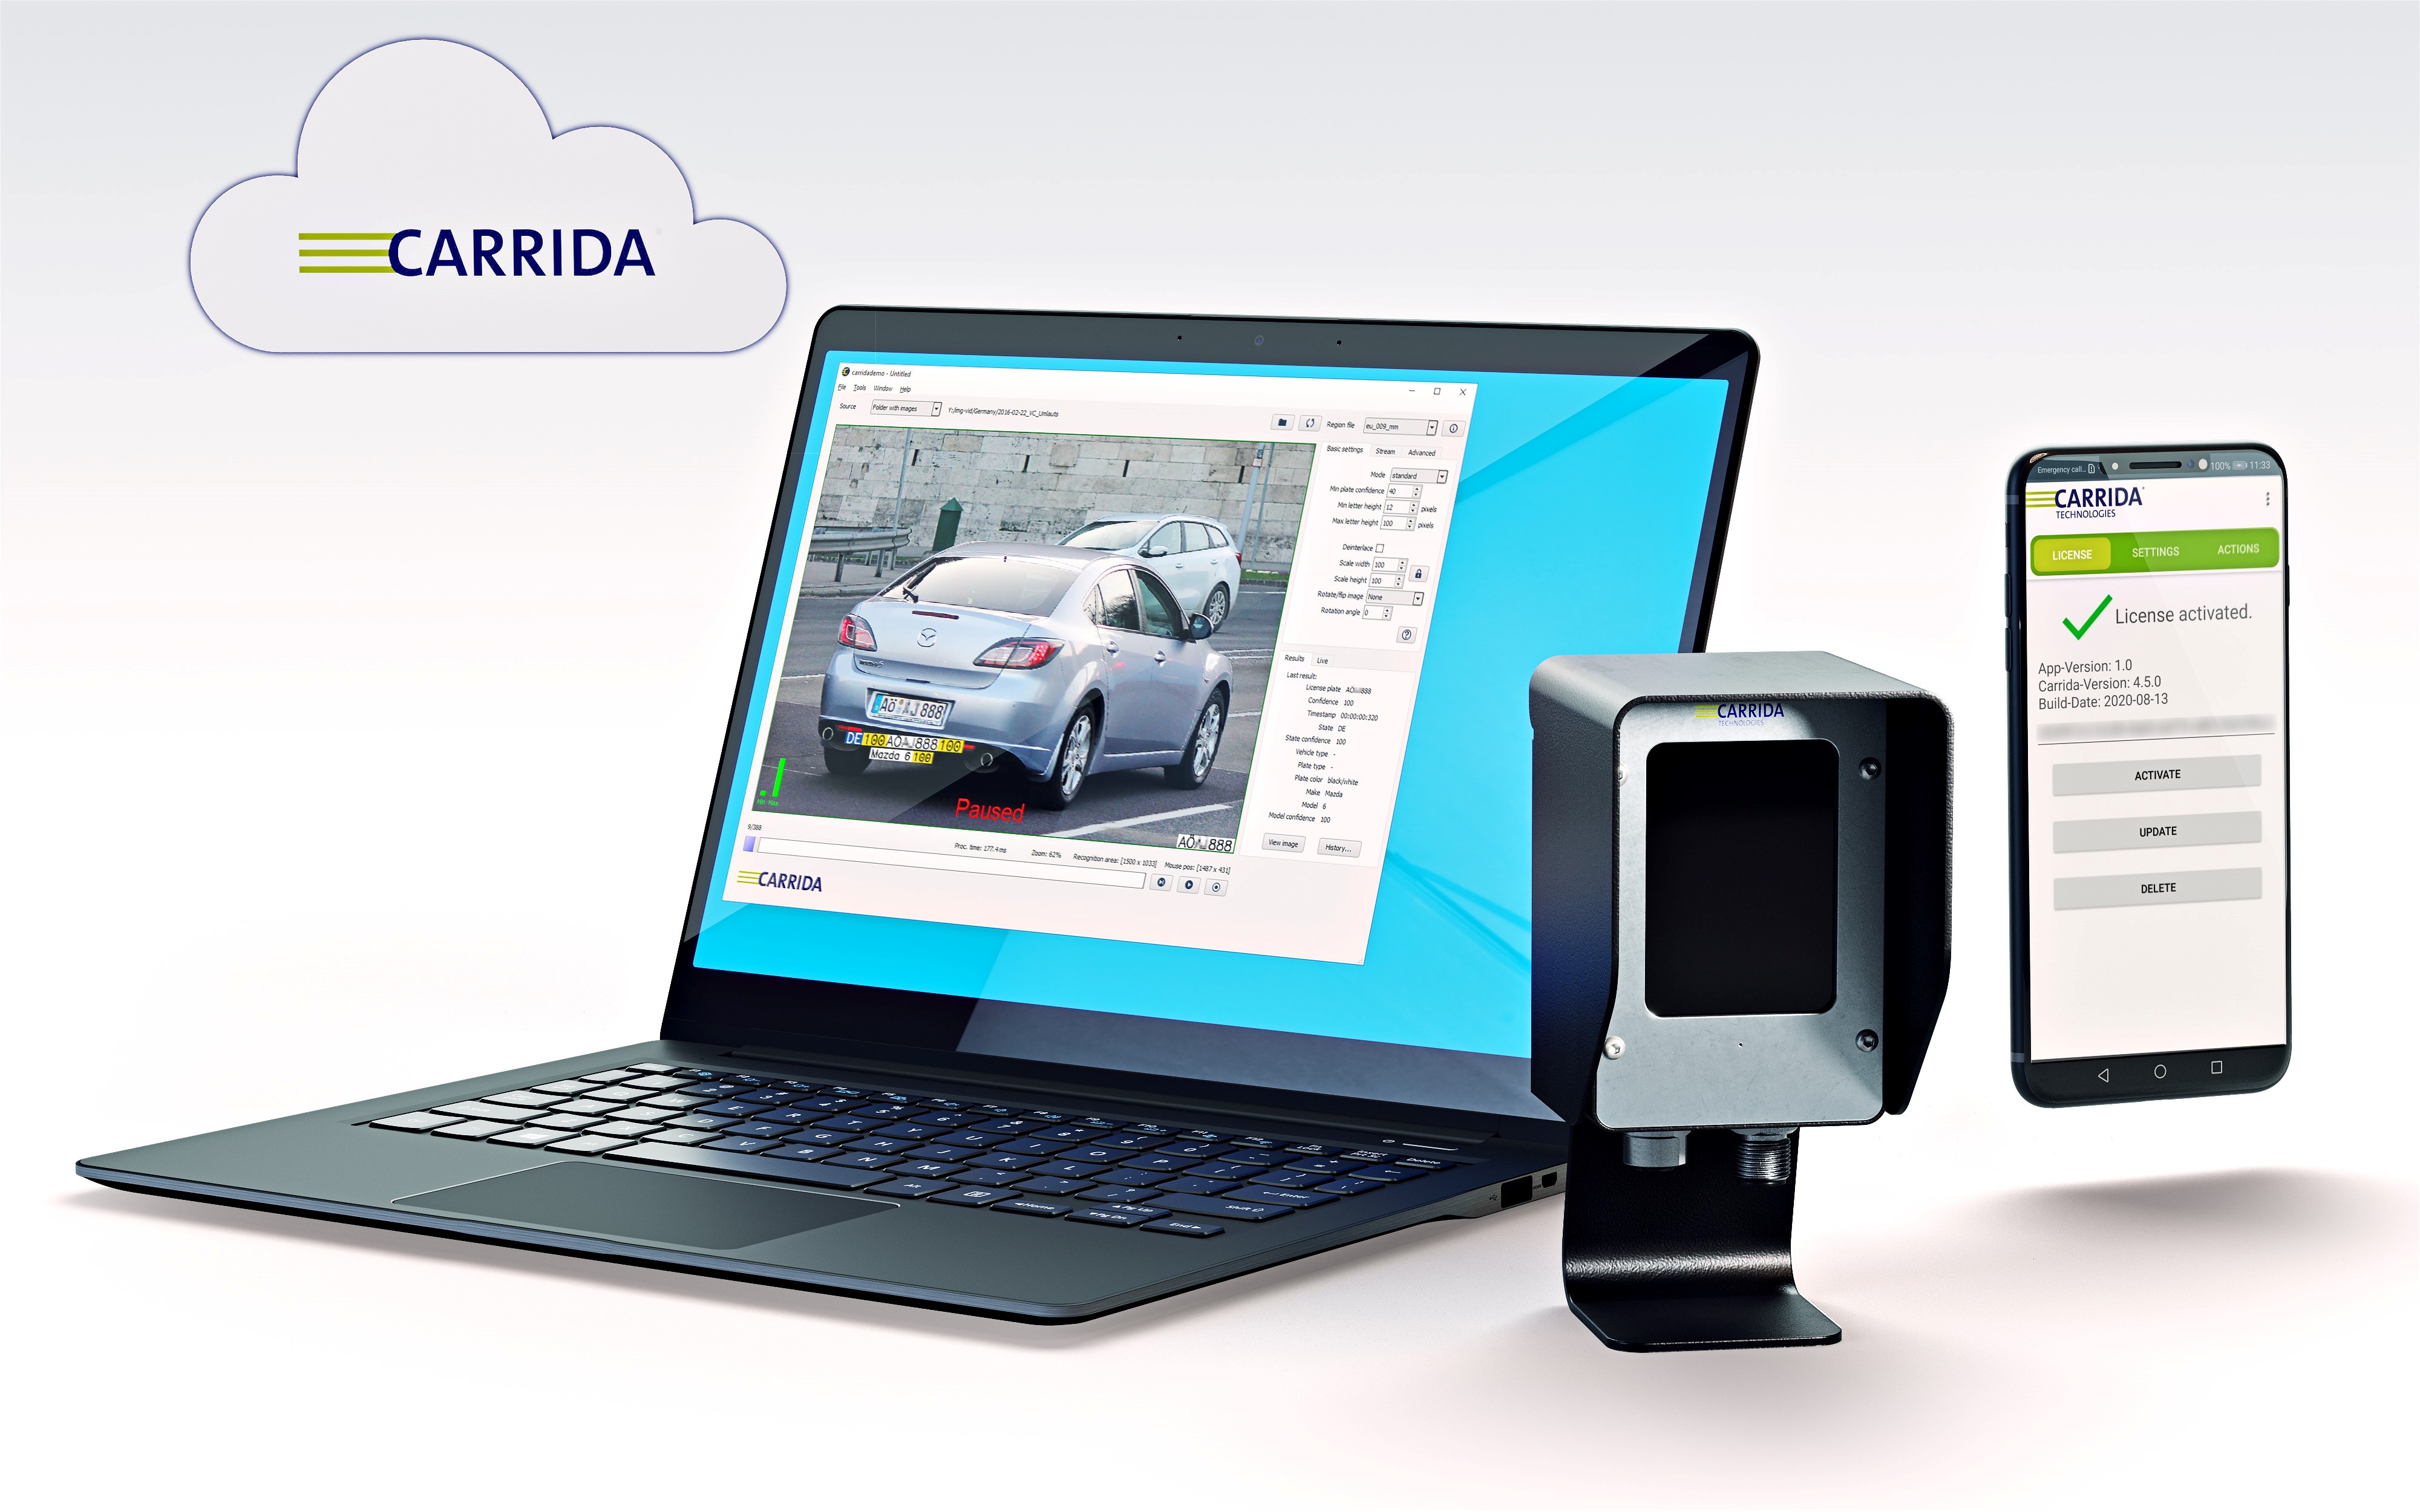 The CARRIDA SDK detects and reads all license plates worldwide, with highest accuracy and additional features such as make & model recognition and vehicle classification. It runs hardware independent on any edge device or can be used with traditional IP-, USB- or GigE-Cameras.